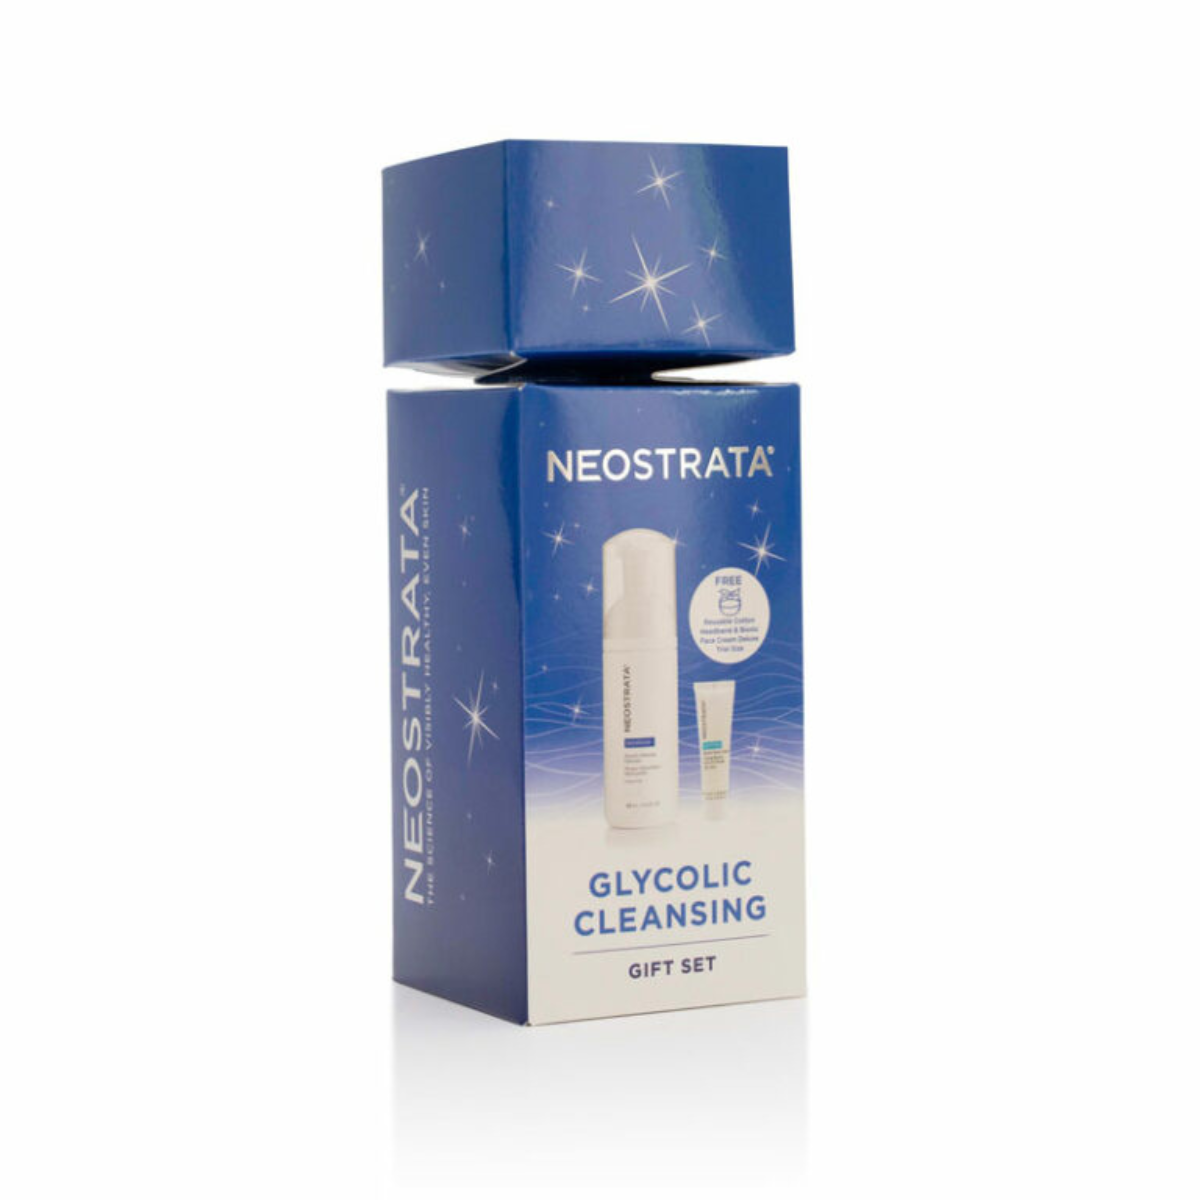 Neostrata Glycolic Cleansing Cracker SAVE 45%